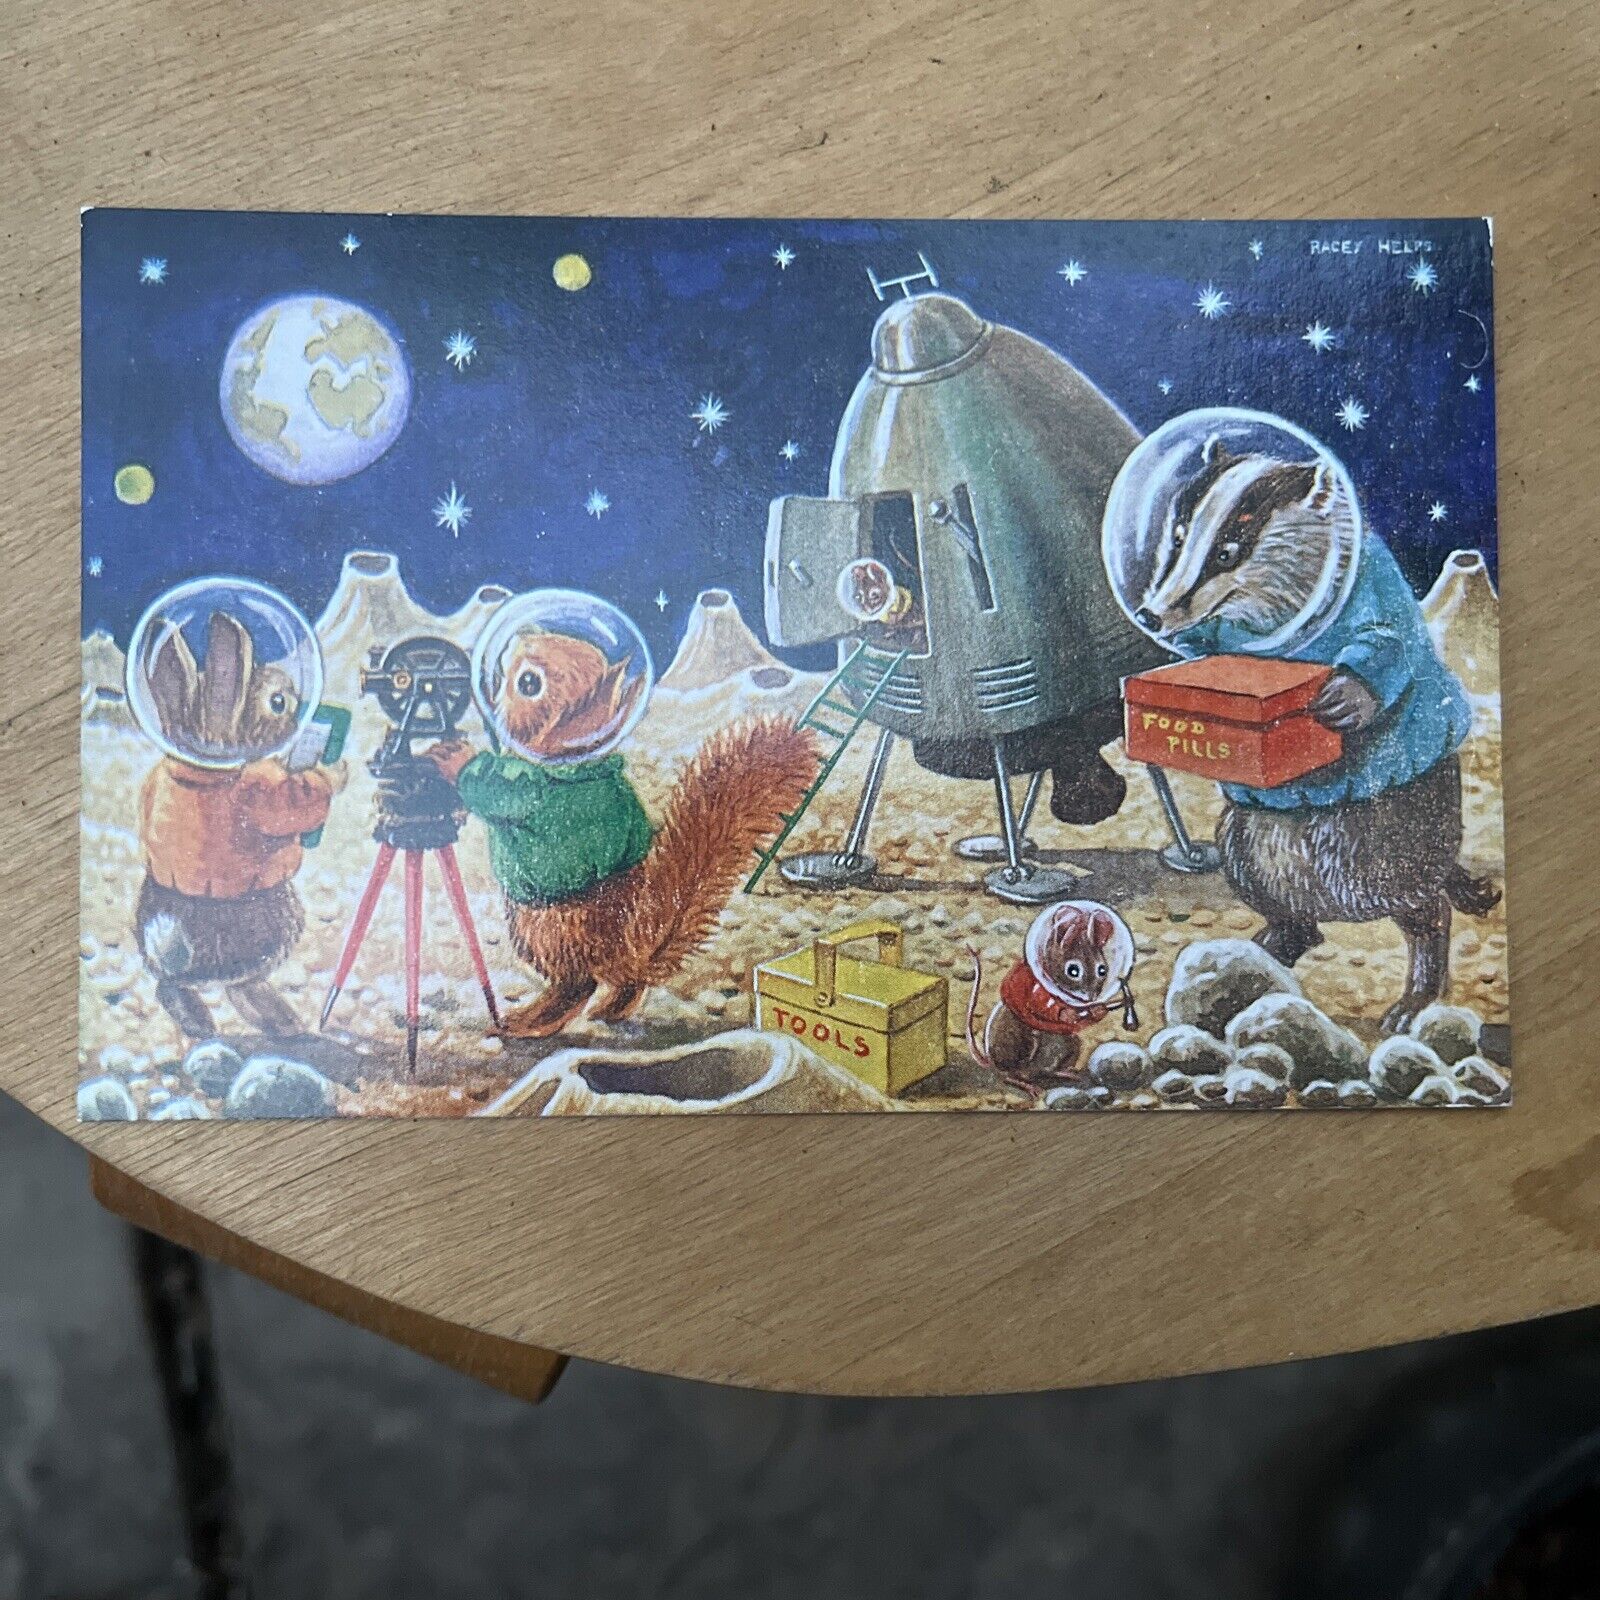 Landing On The Moon Vintage Racey Helps Astronomy Postcard London Britain